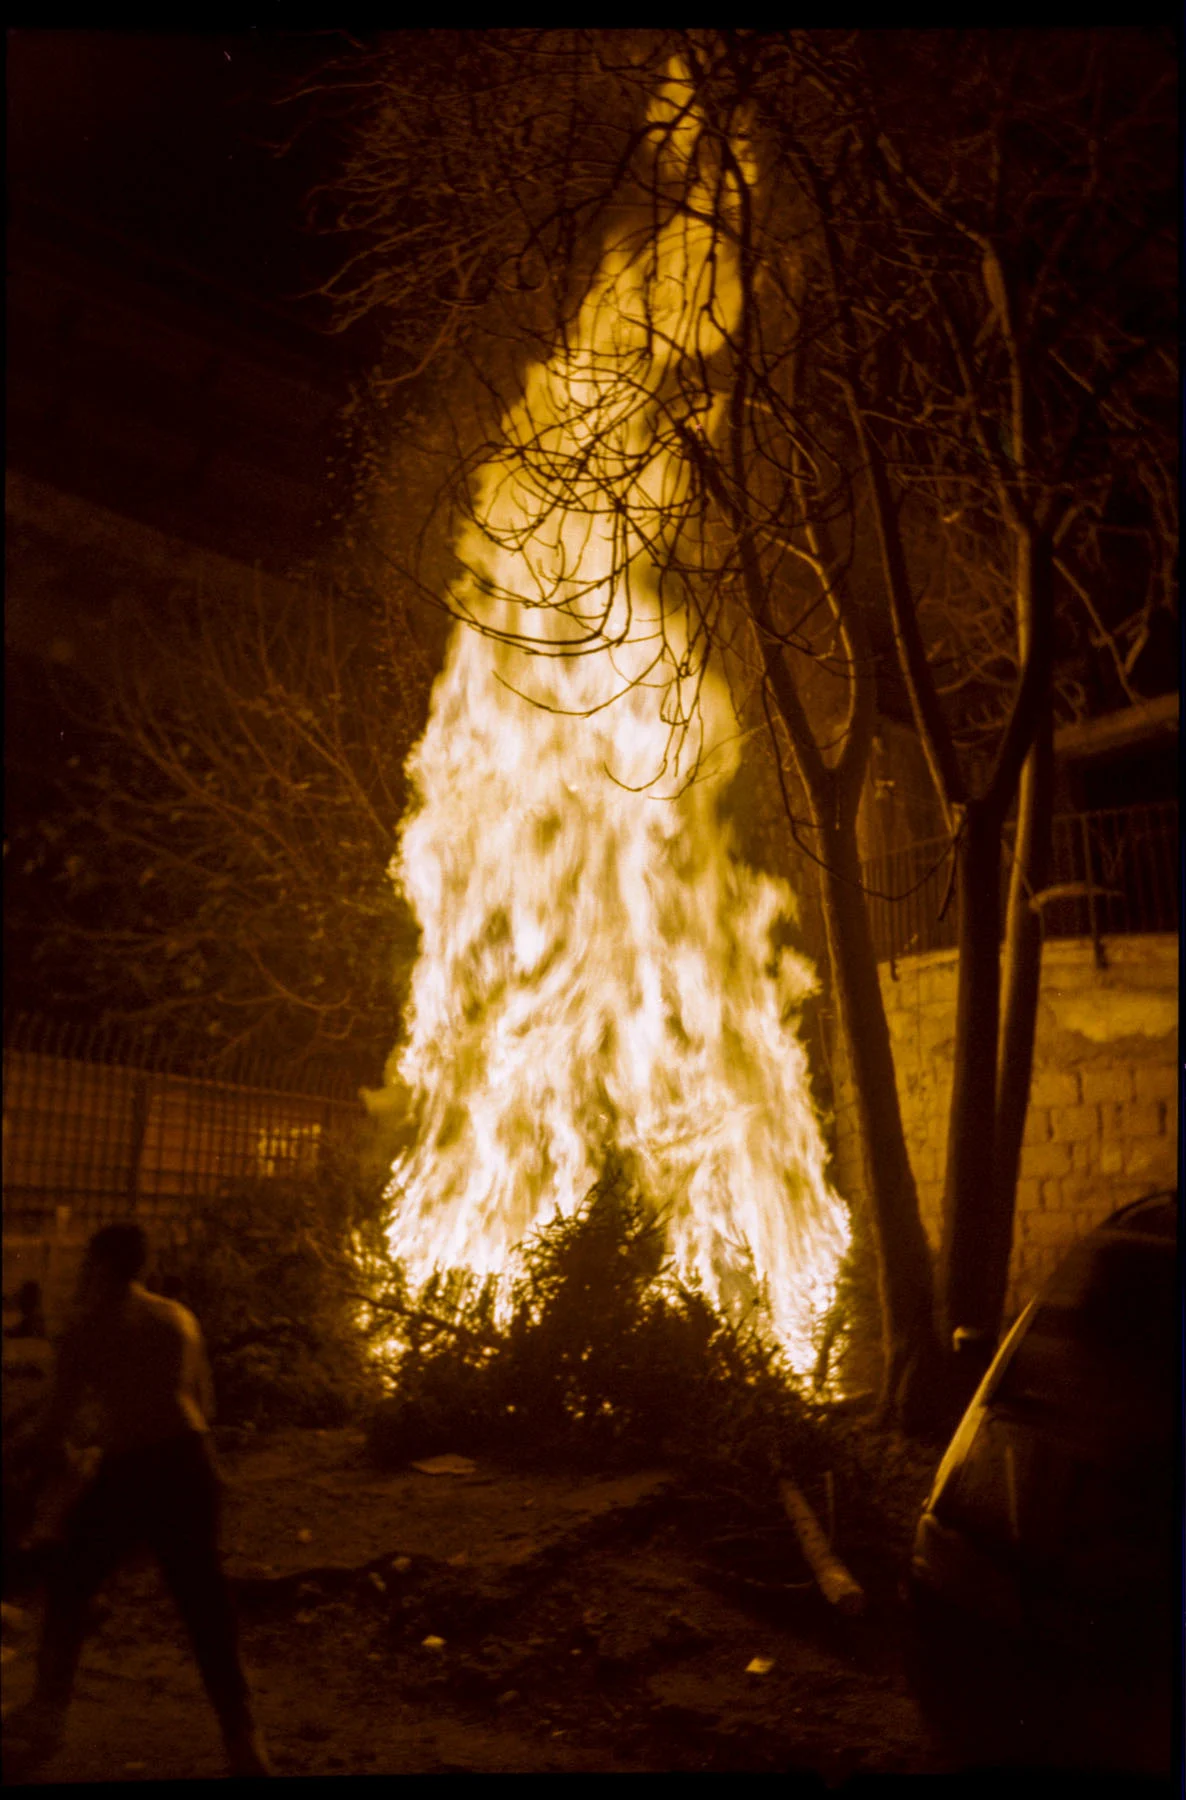 A photo of a small fire roaring in the street at night